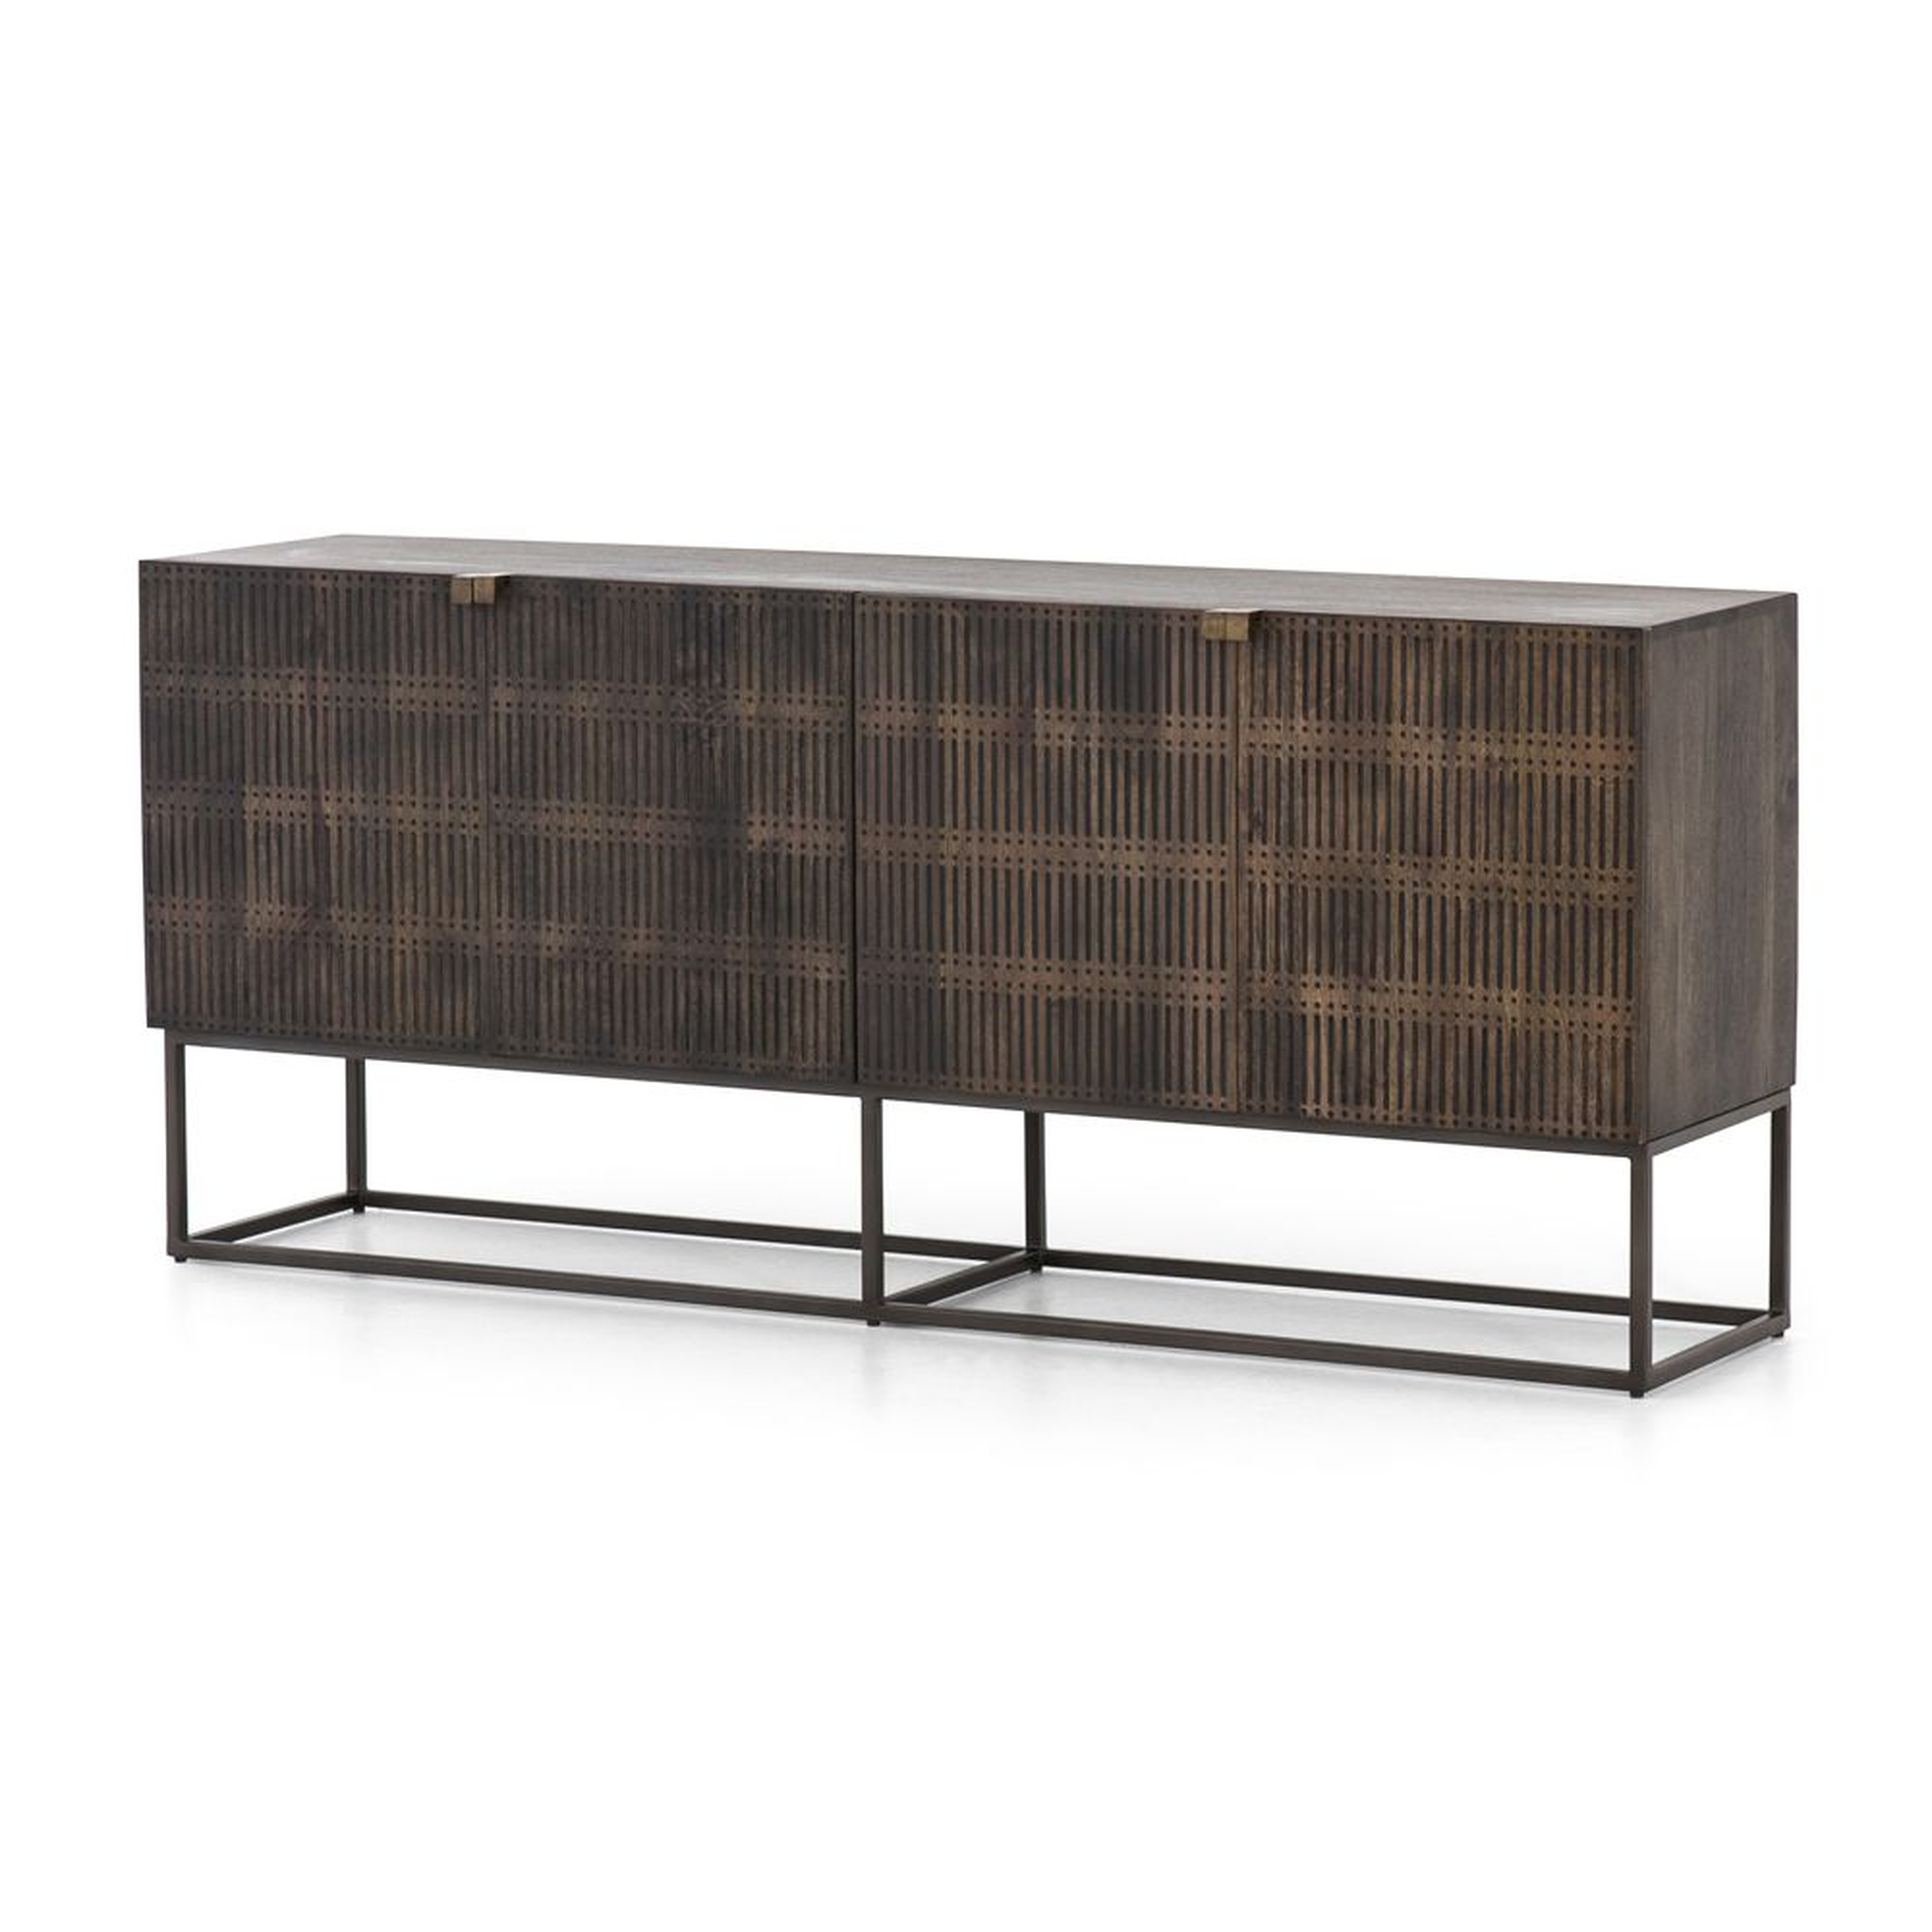 Ivan Wood and Iron Storage Media Console - Crate and Barrel